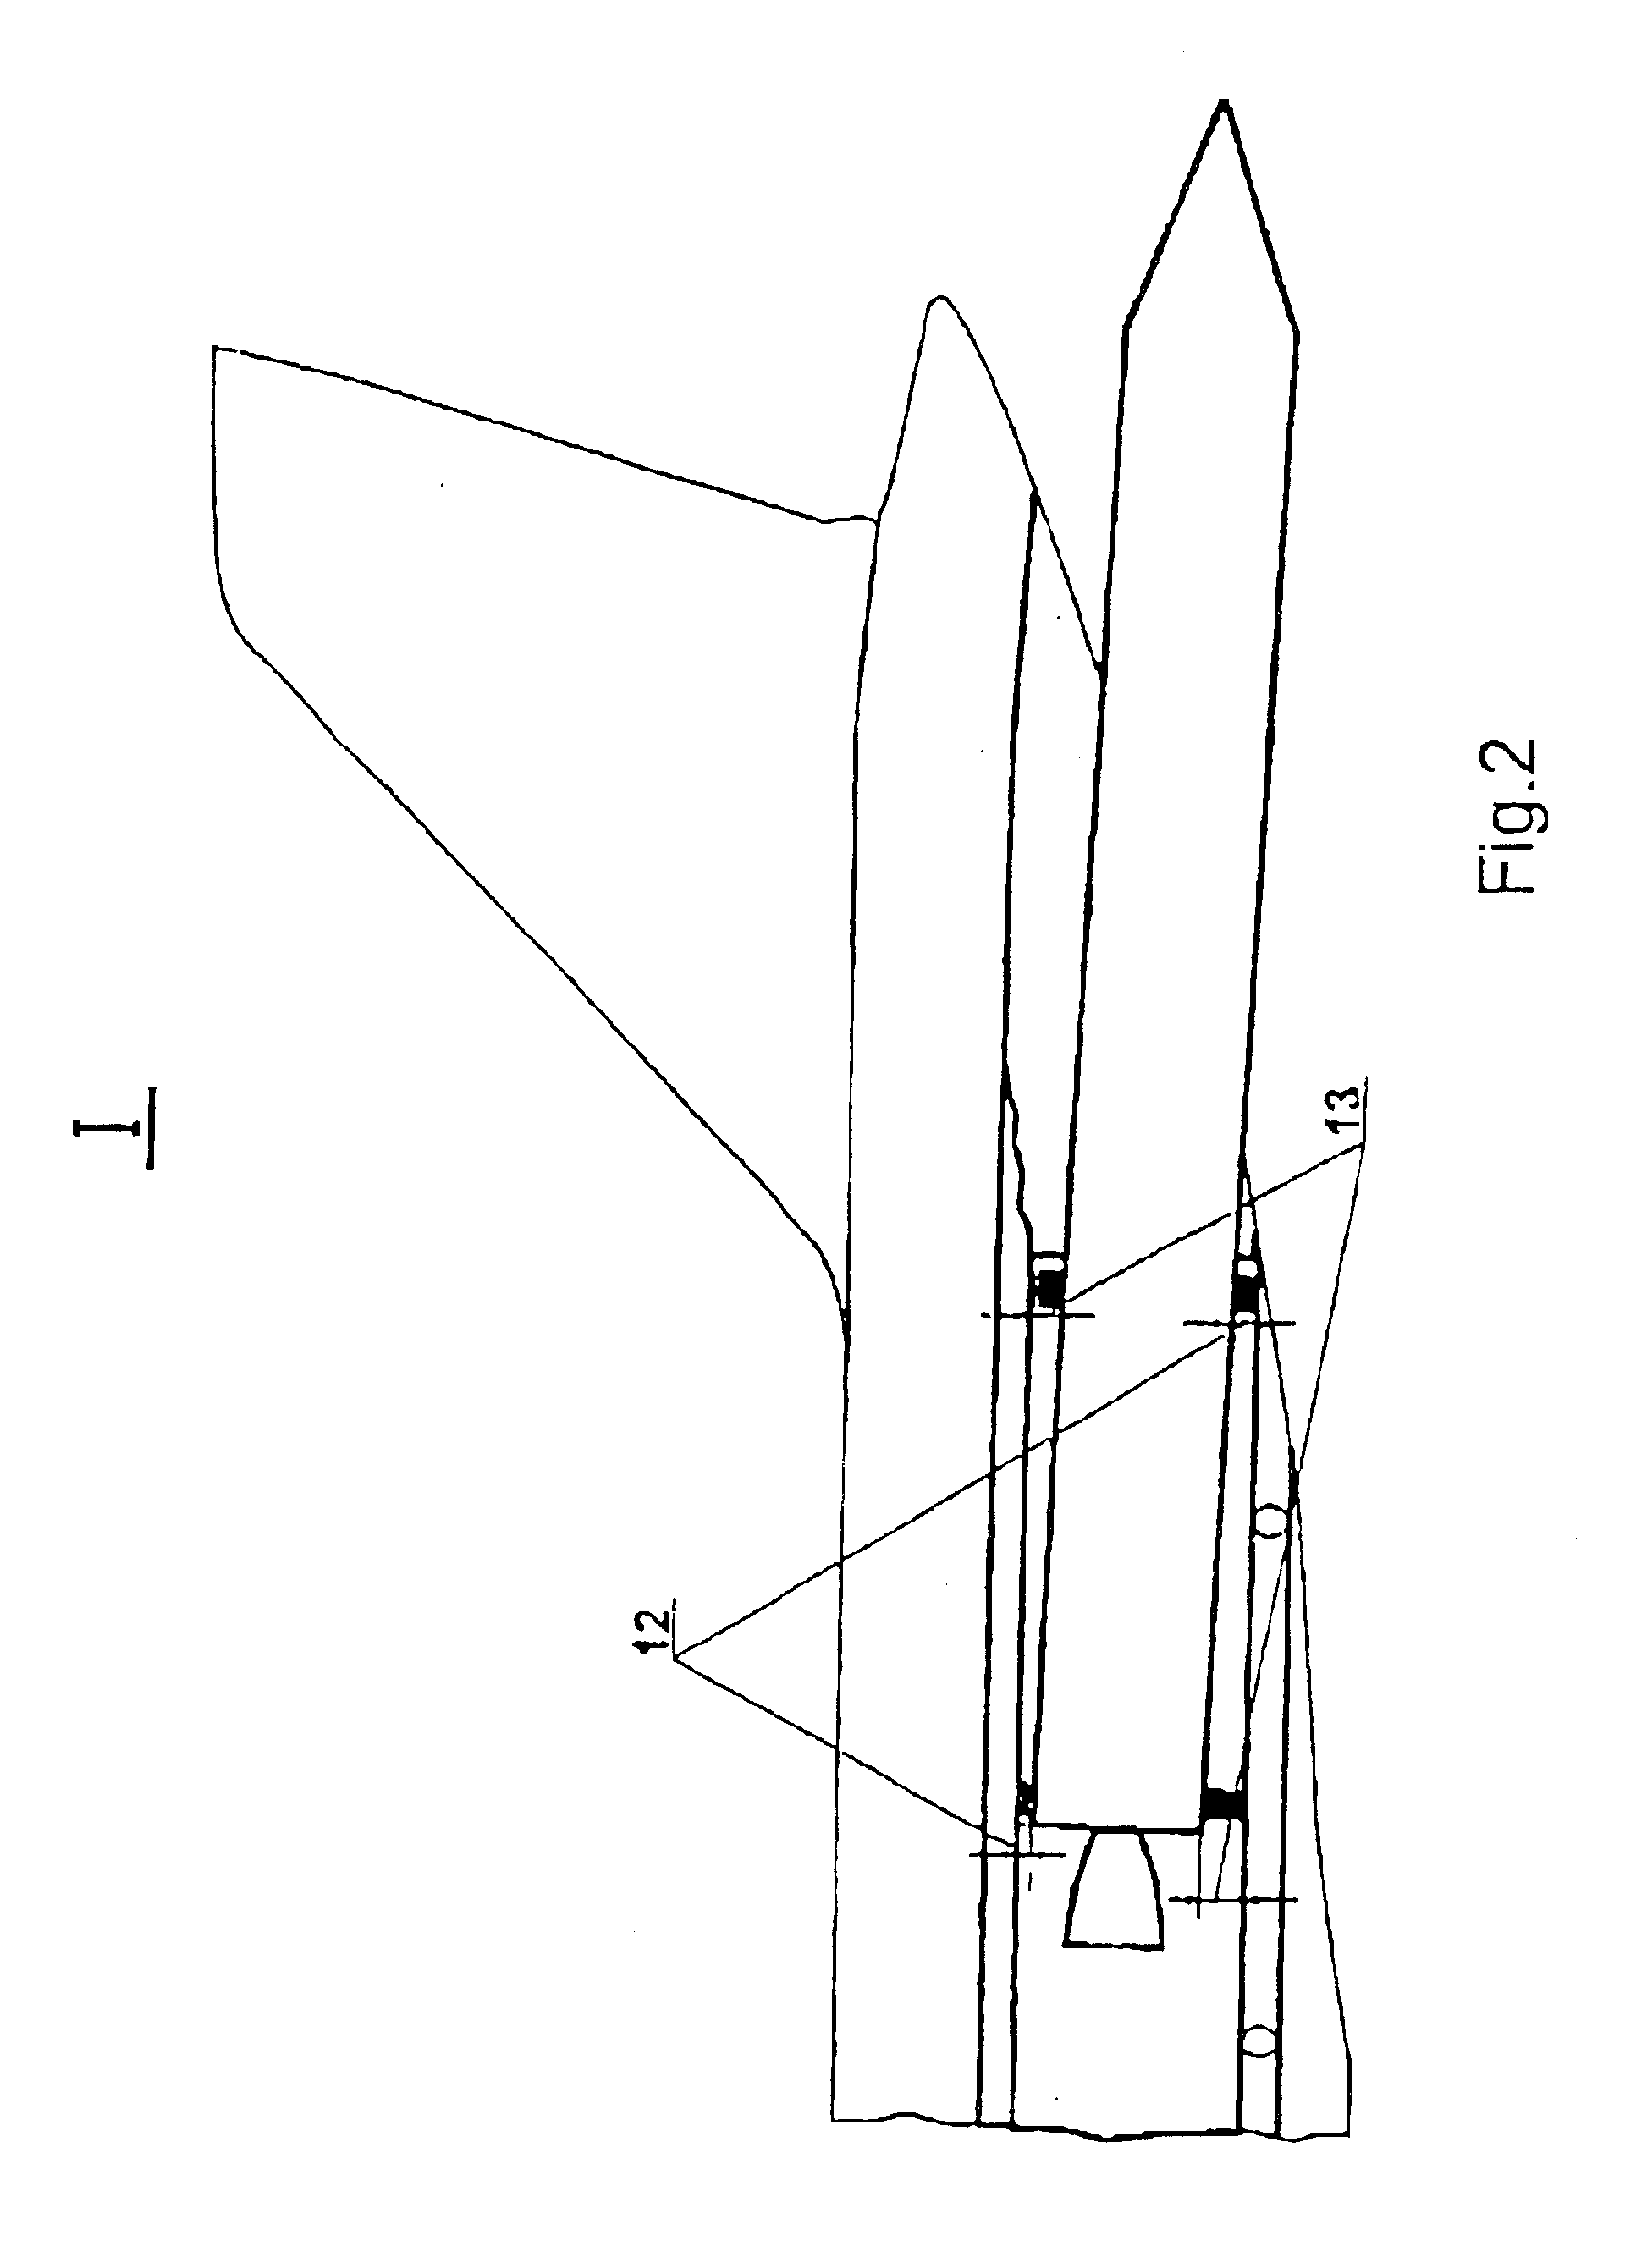 Apparatus for launching heavy large payloads from an aircraft